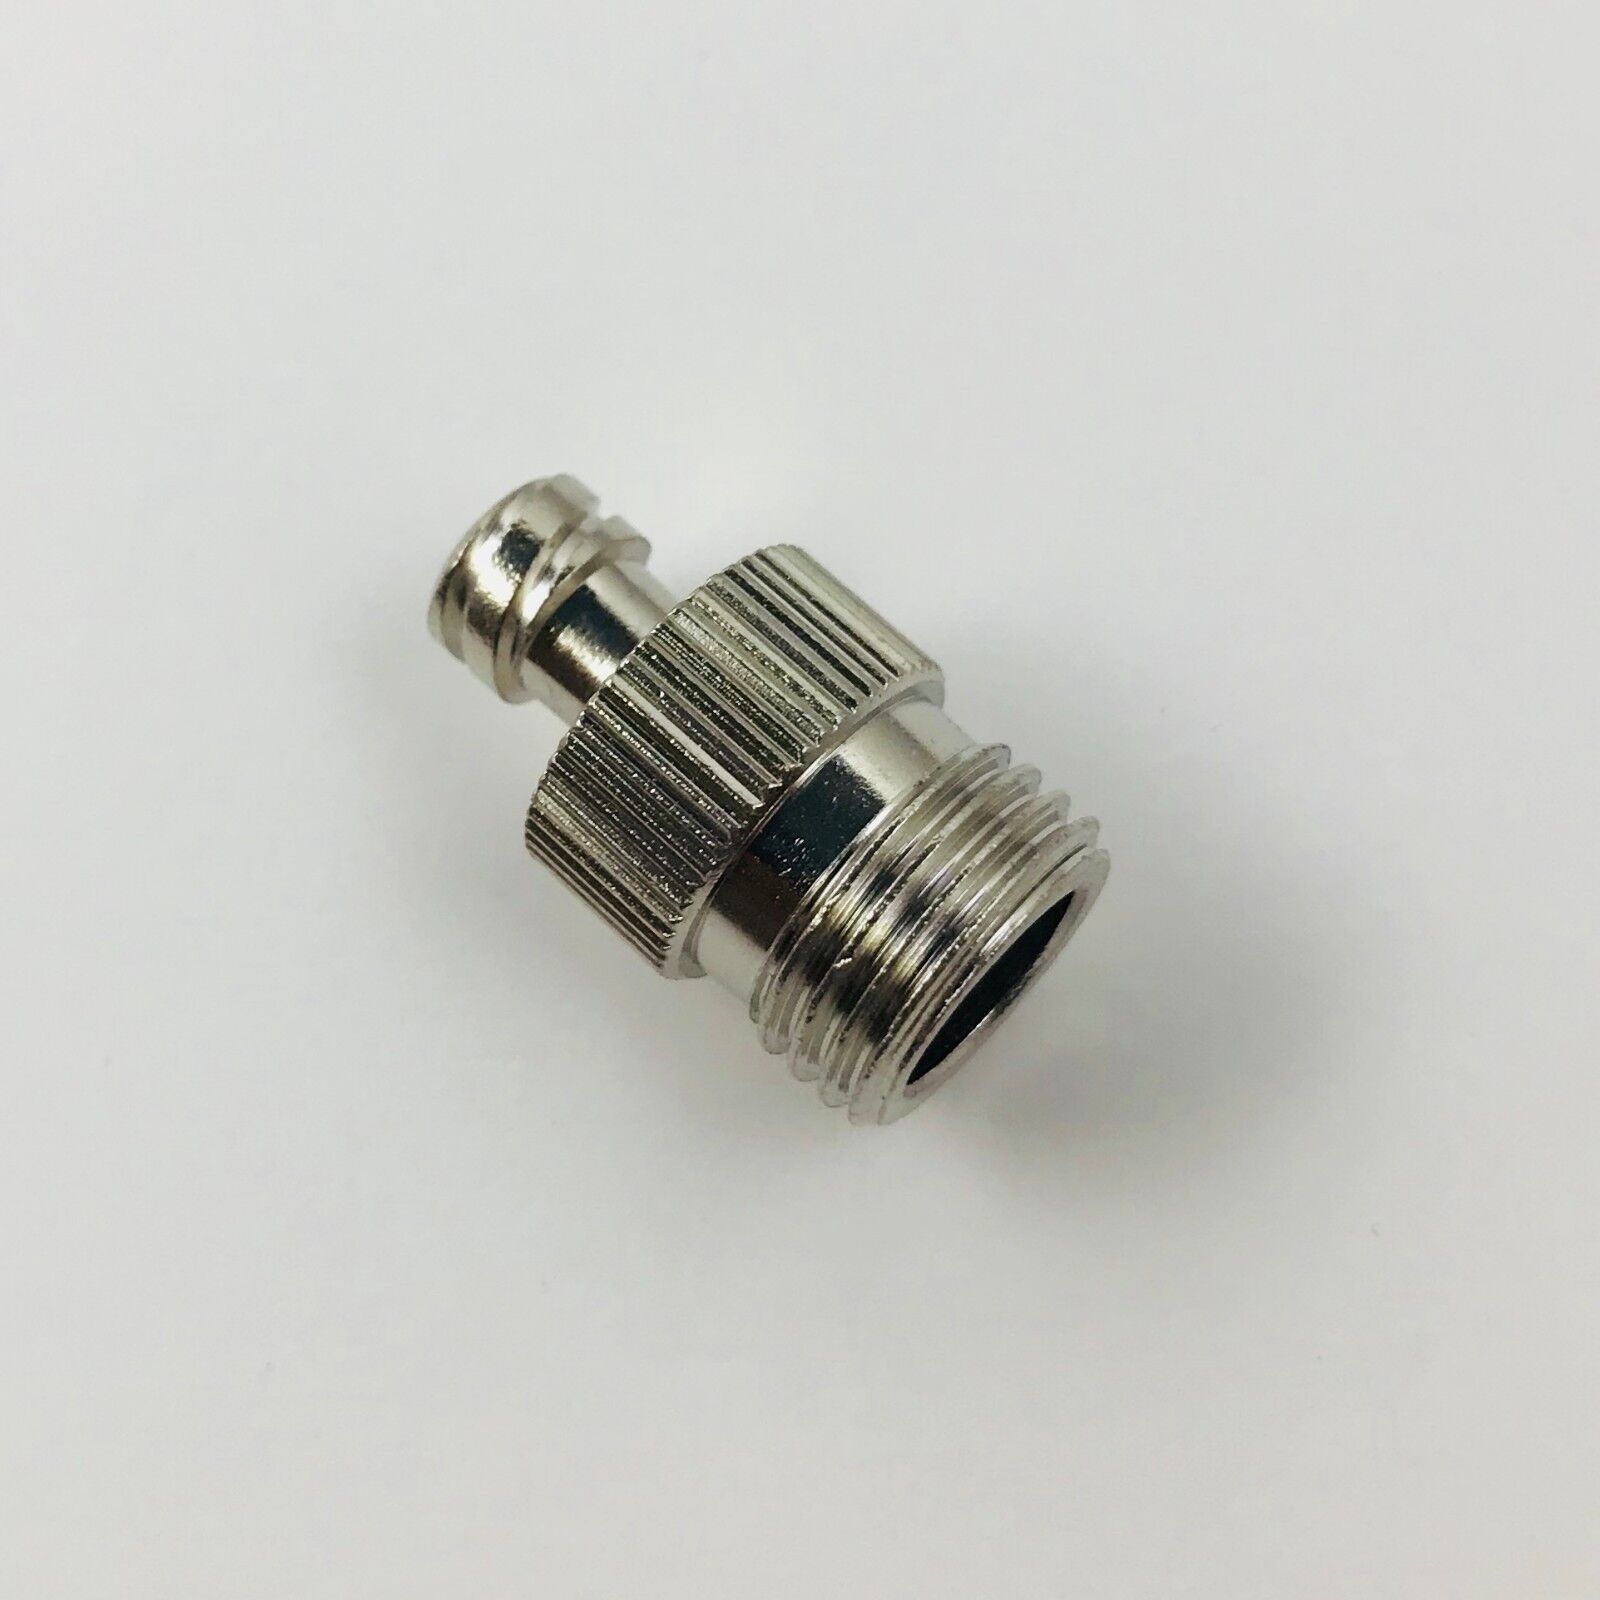 Female luer x Female luer Cadence Nickel-Plated Brass Fittings